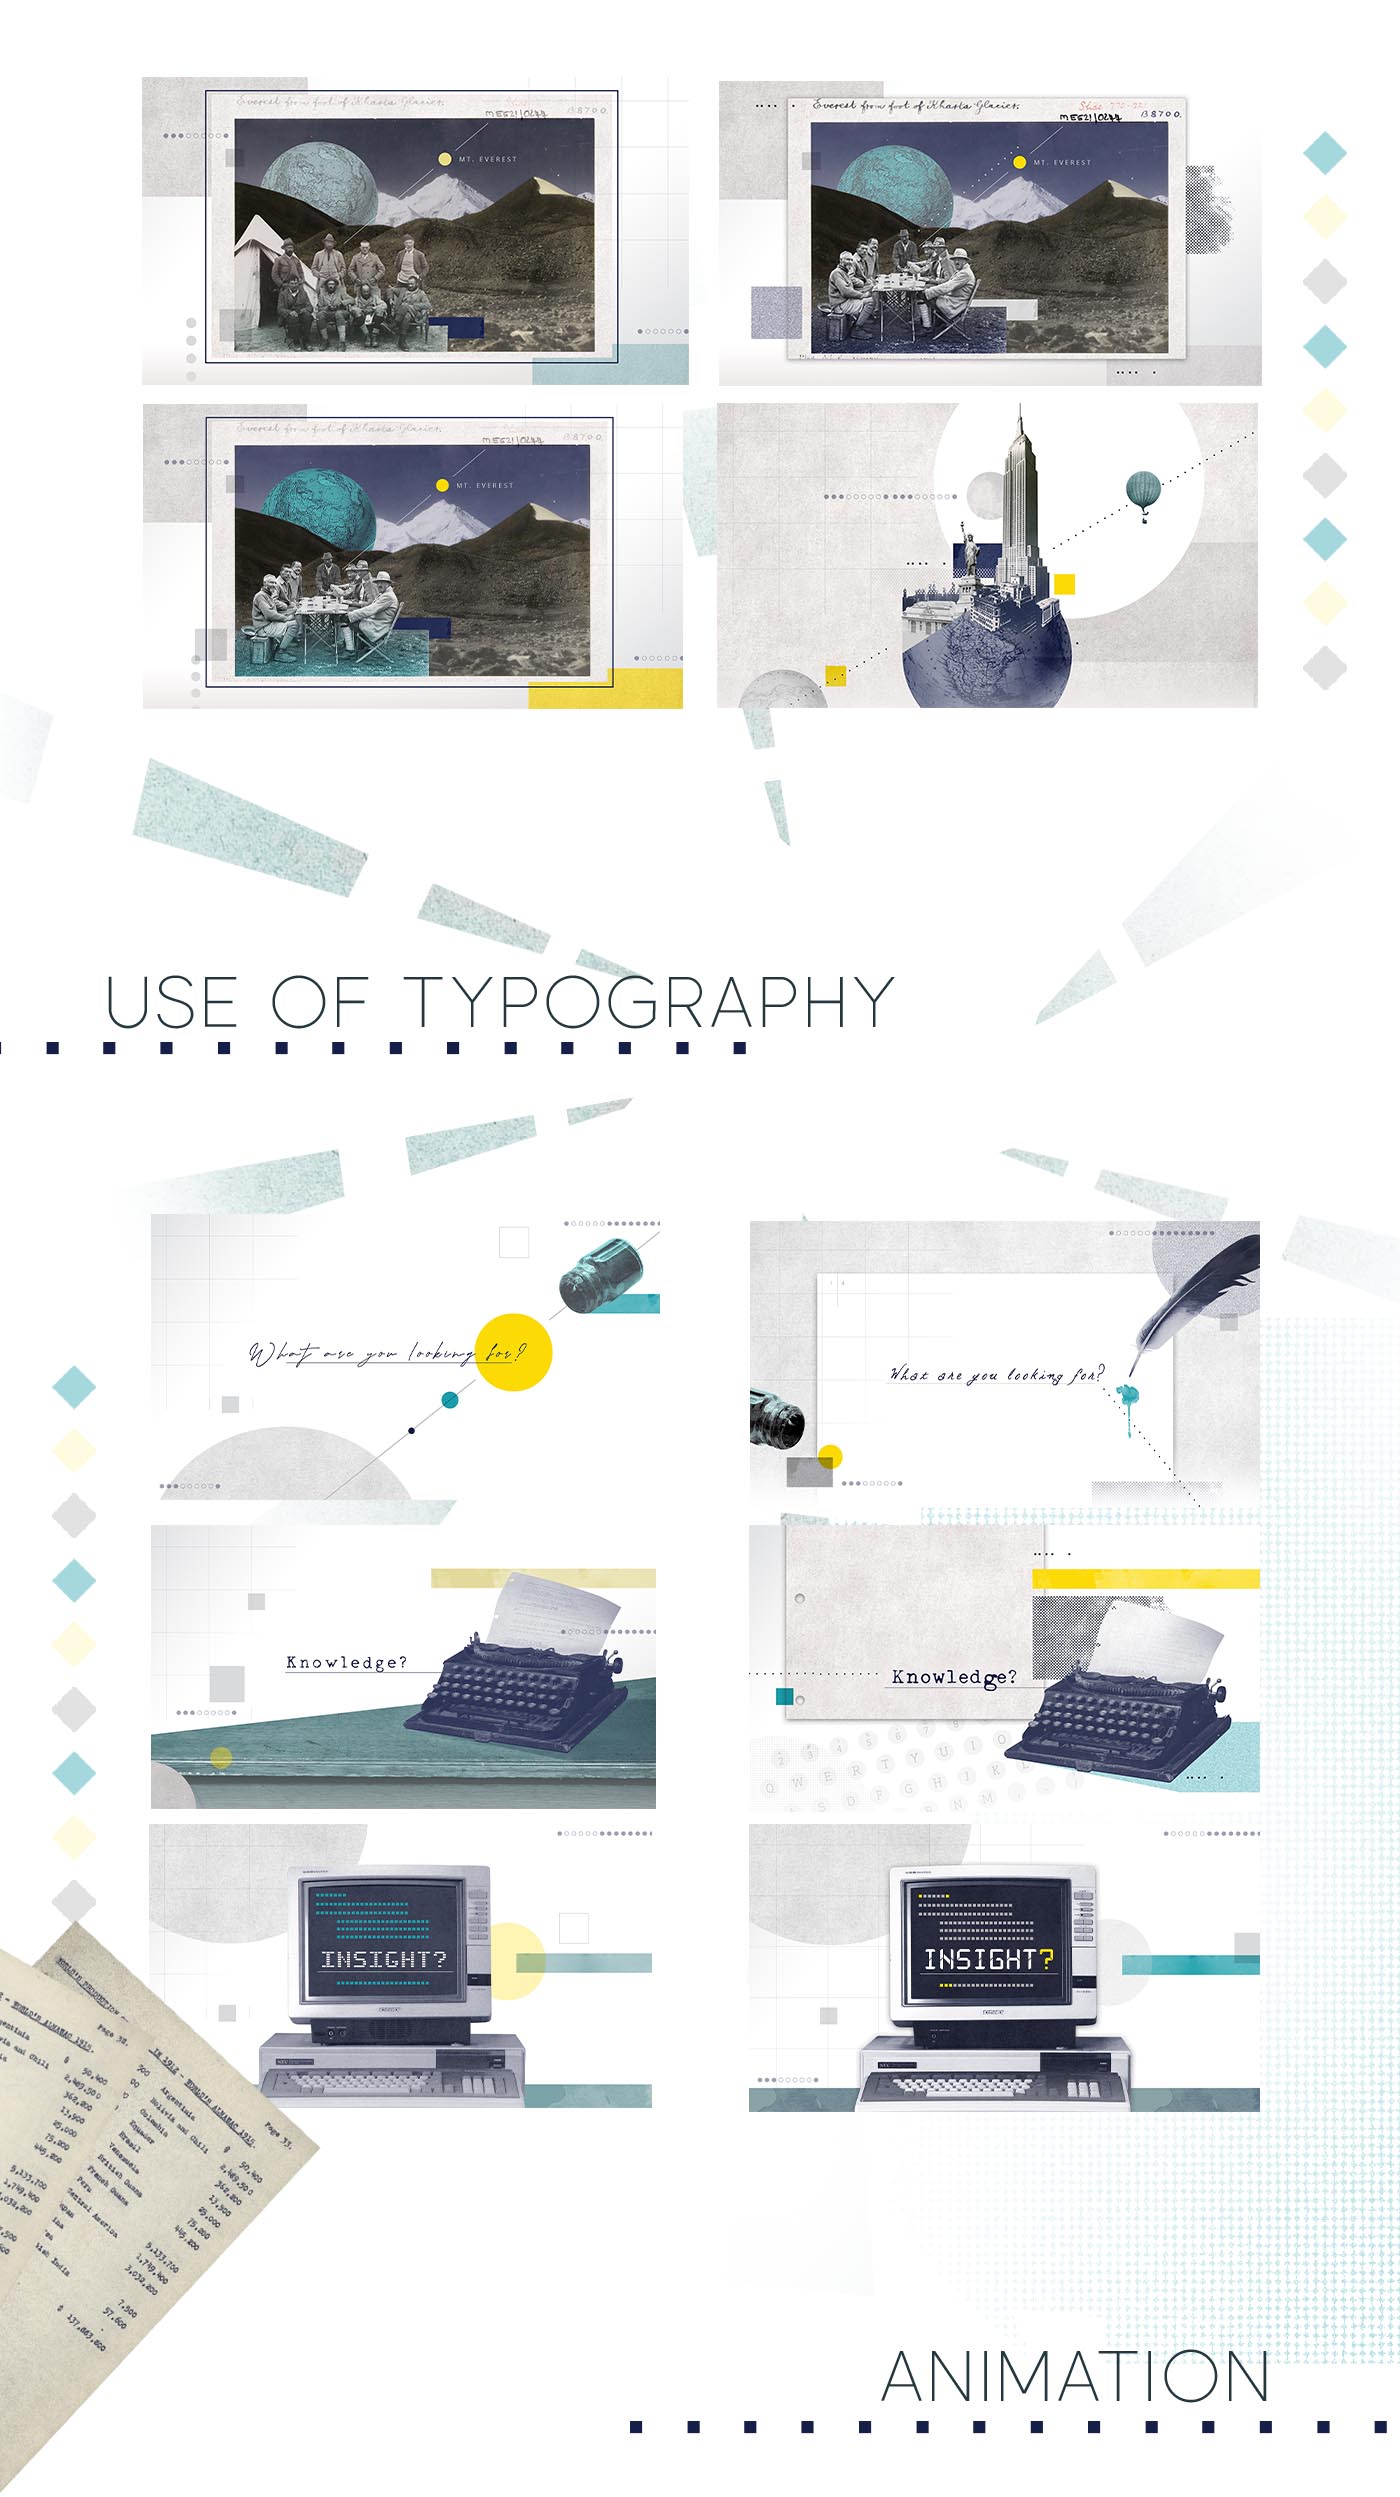 Wiley - photography & typography